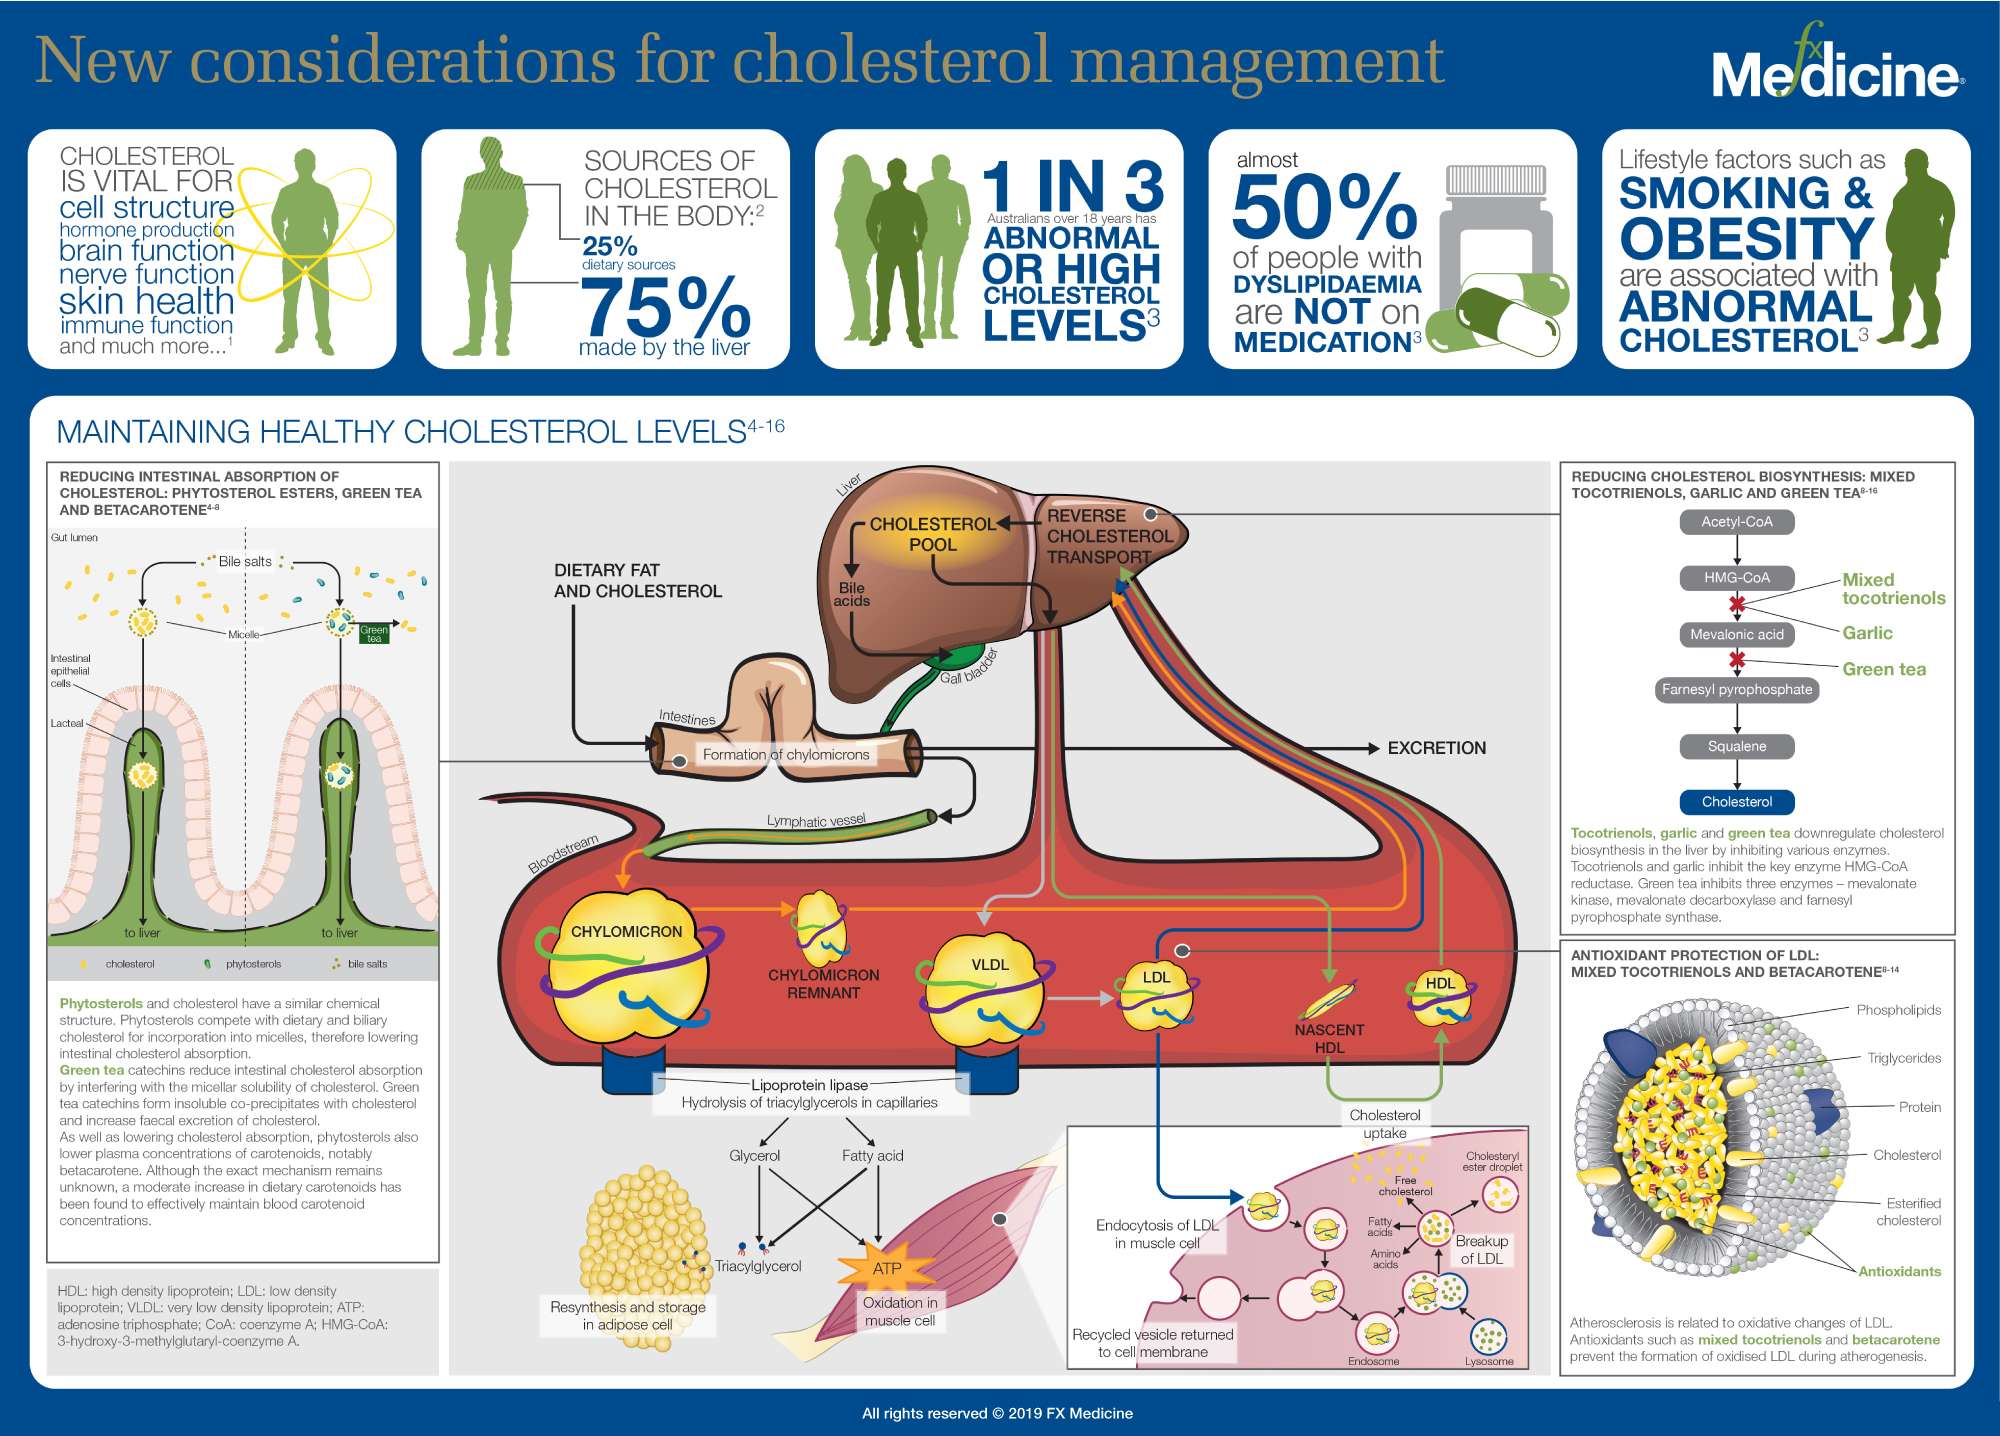 INFOGRAPHIC: New Considerations for Cholesterol Management